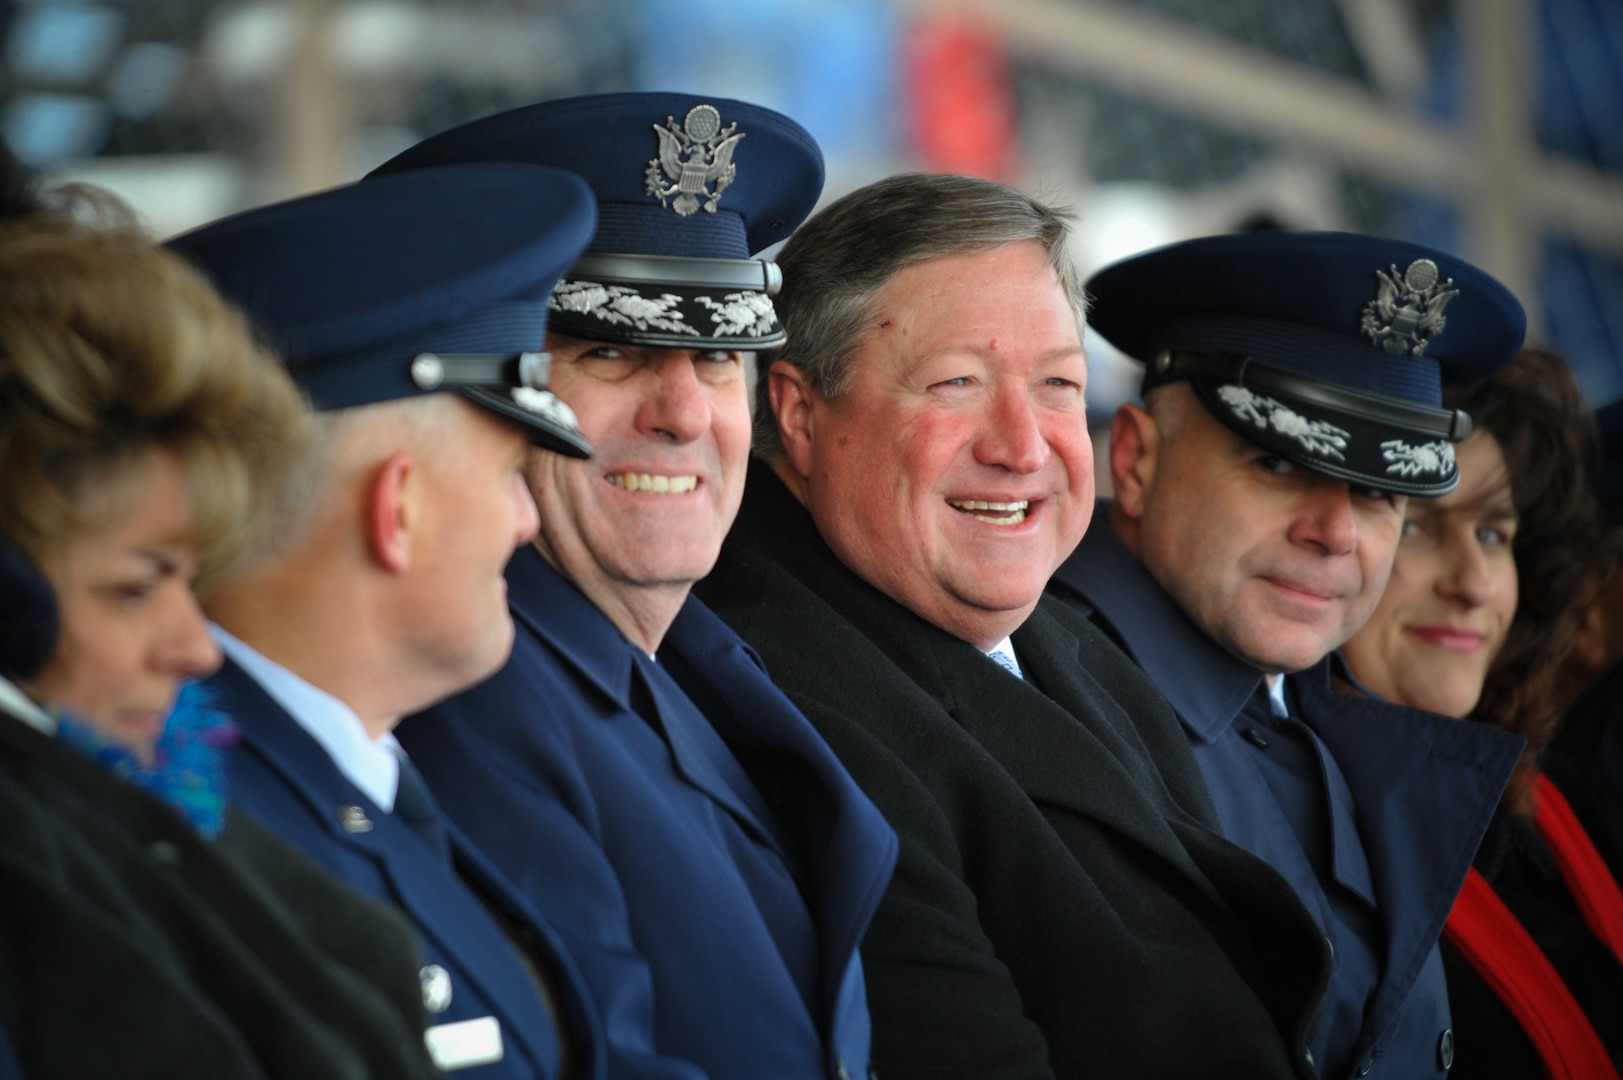 Secretary of the Air Force Michael Donley stands with Gen. Stephen R. Lorenz (left of Donley) and Col. Shane Courville (right of Donley) after the graduation Jan 8, 2010, at Lackland Air Force Base, Texas. General Lorenz is the Air Education and Training Command commander. Colonel Courville is the 737th Training Group Air Force Basic Military Training commander. (U.S. Air Force photo/Lance Cheung)